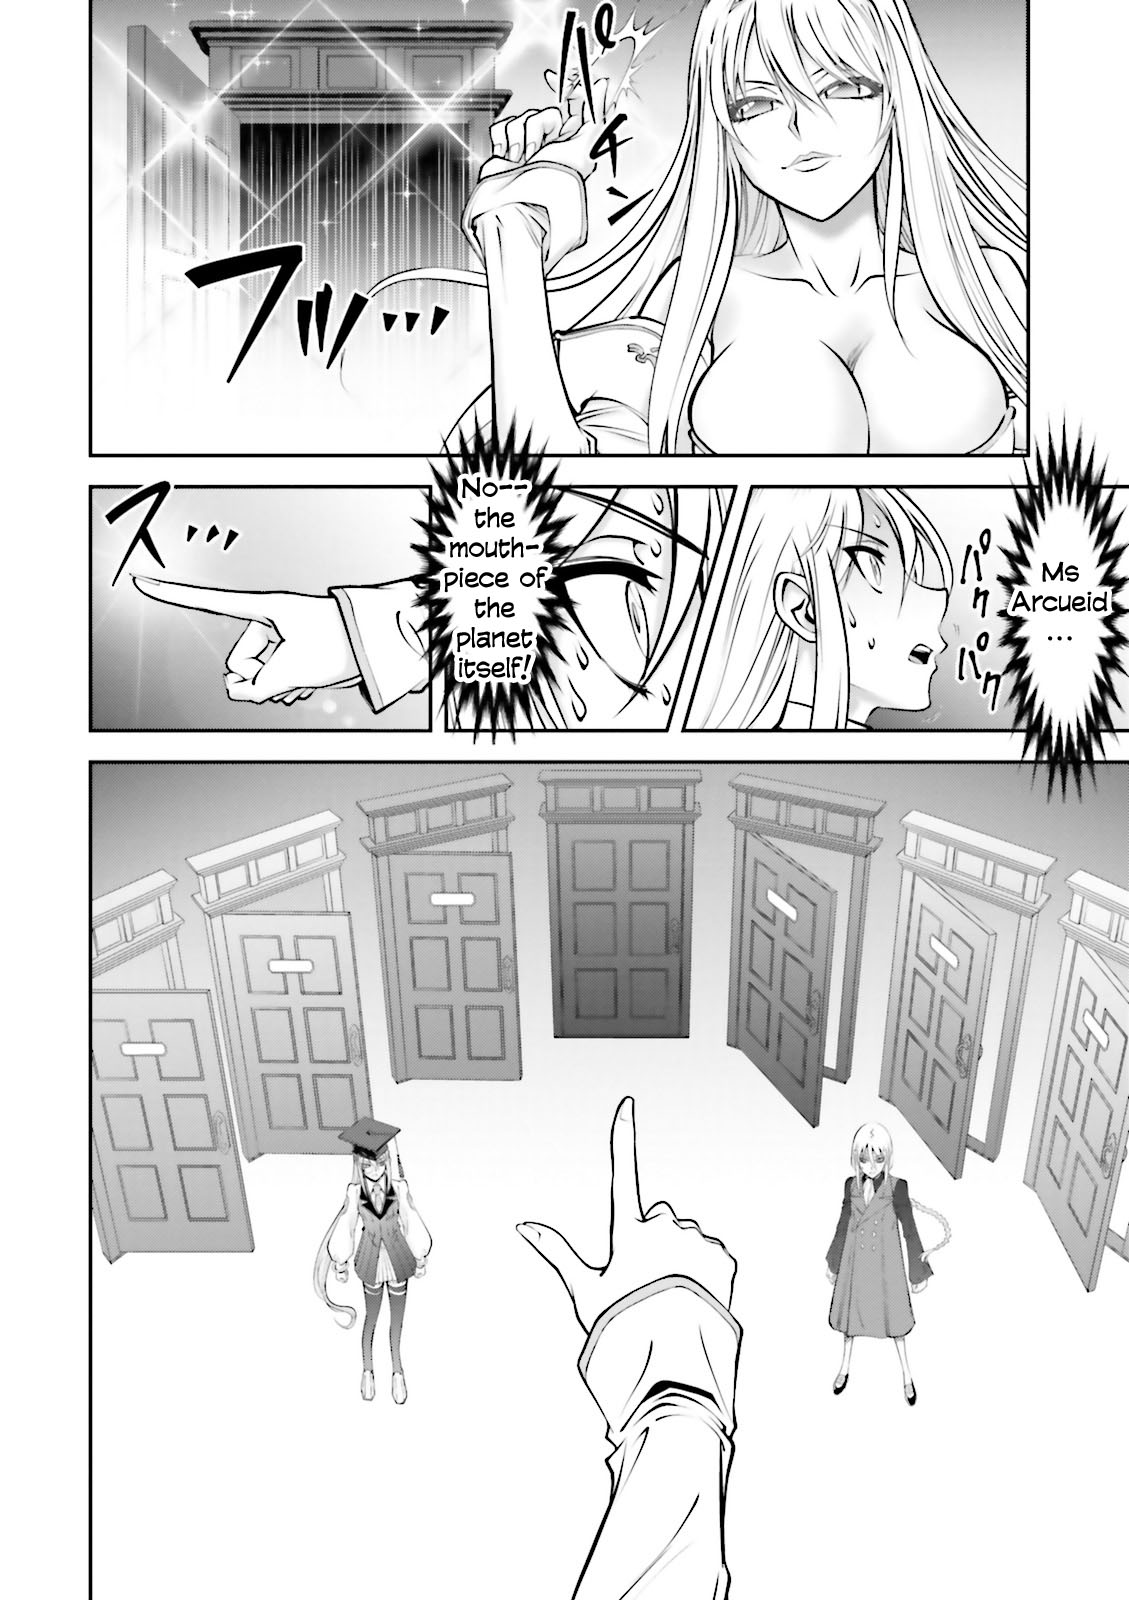 Melty Blood - Back Alley Alliance Nightmare - Page 2